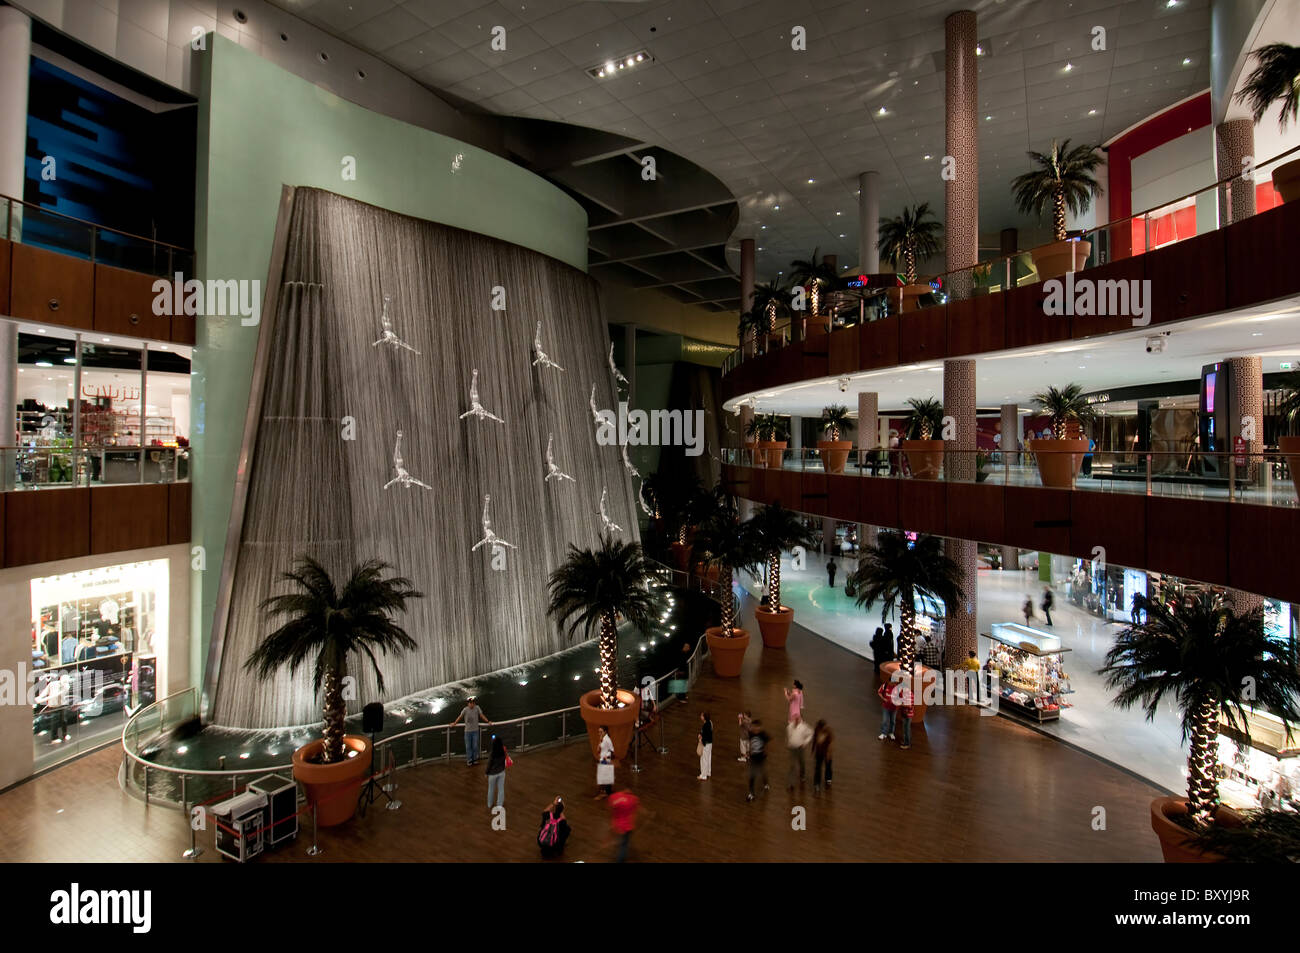 An indoor view of a mall in Dubai Stock Photo